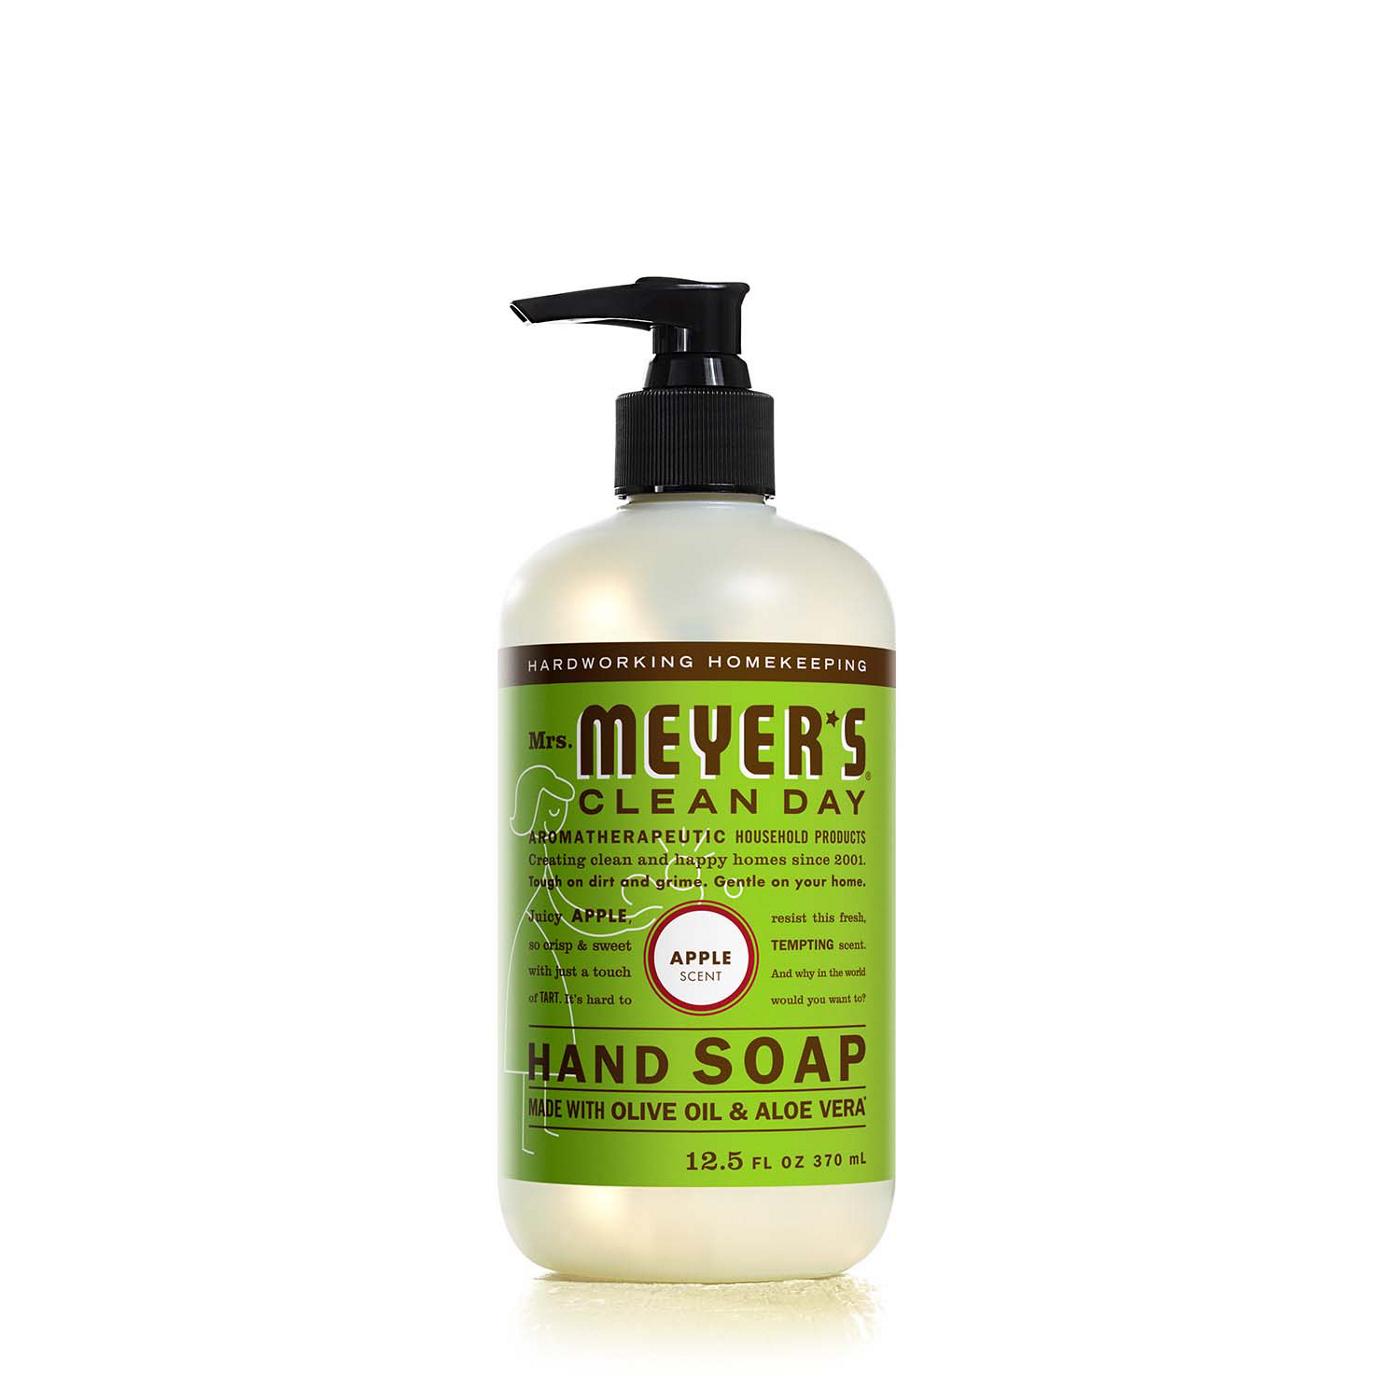 Mrs. Meyer's Clean Day Apple Scent Liquid Hand Soap; image 1 of 5